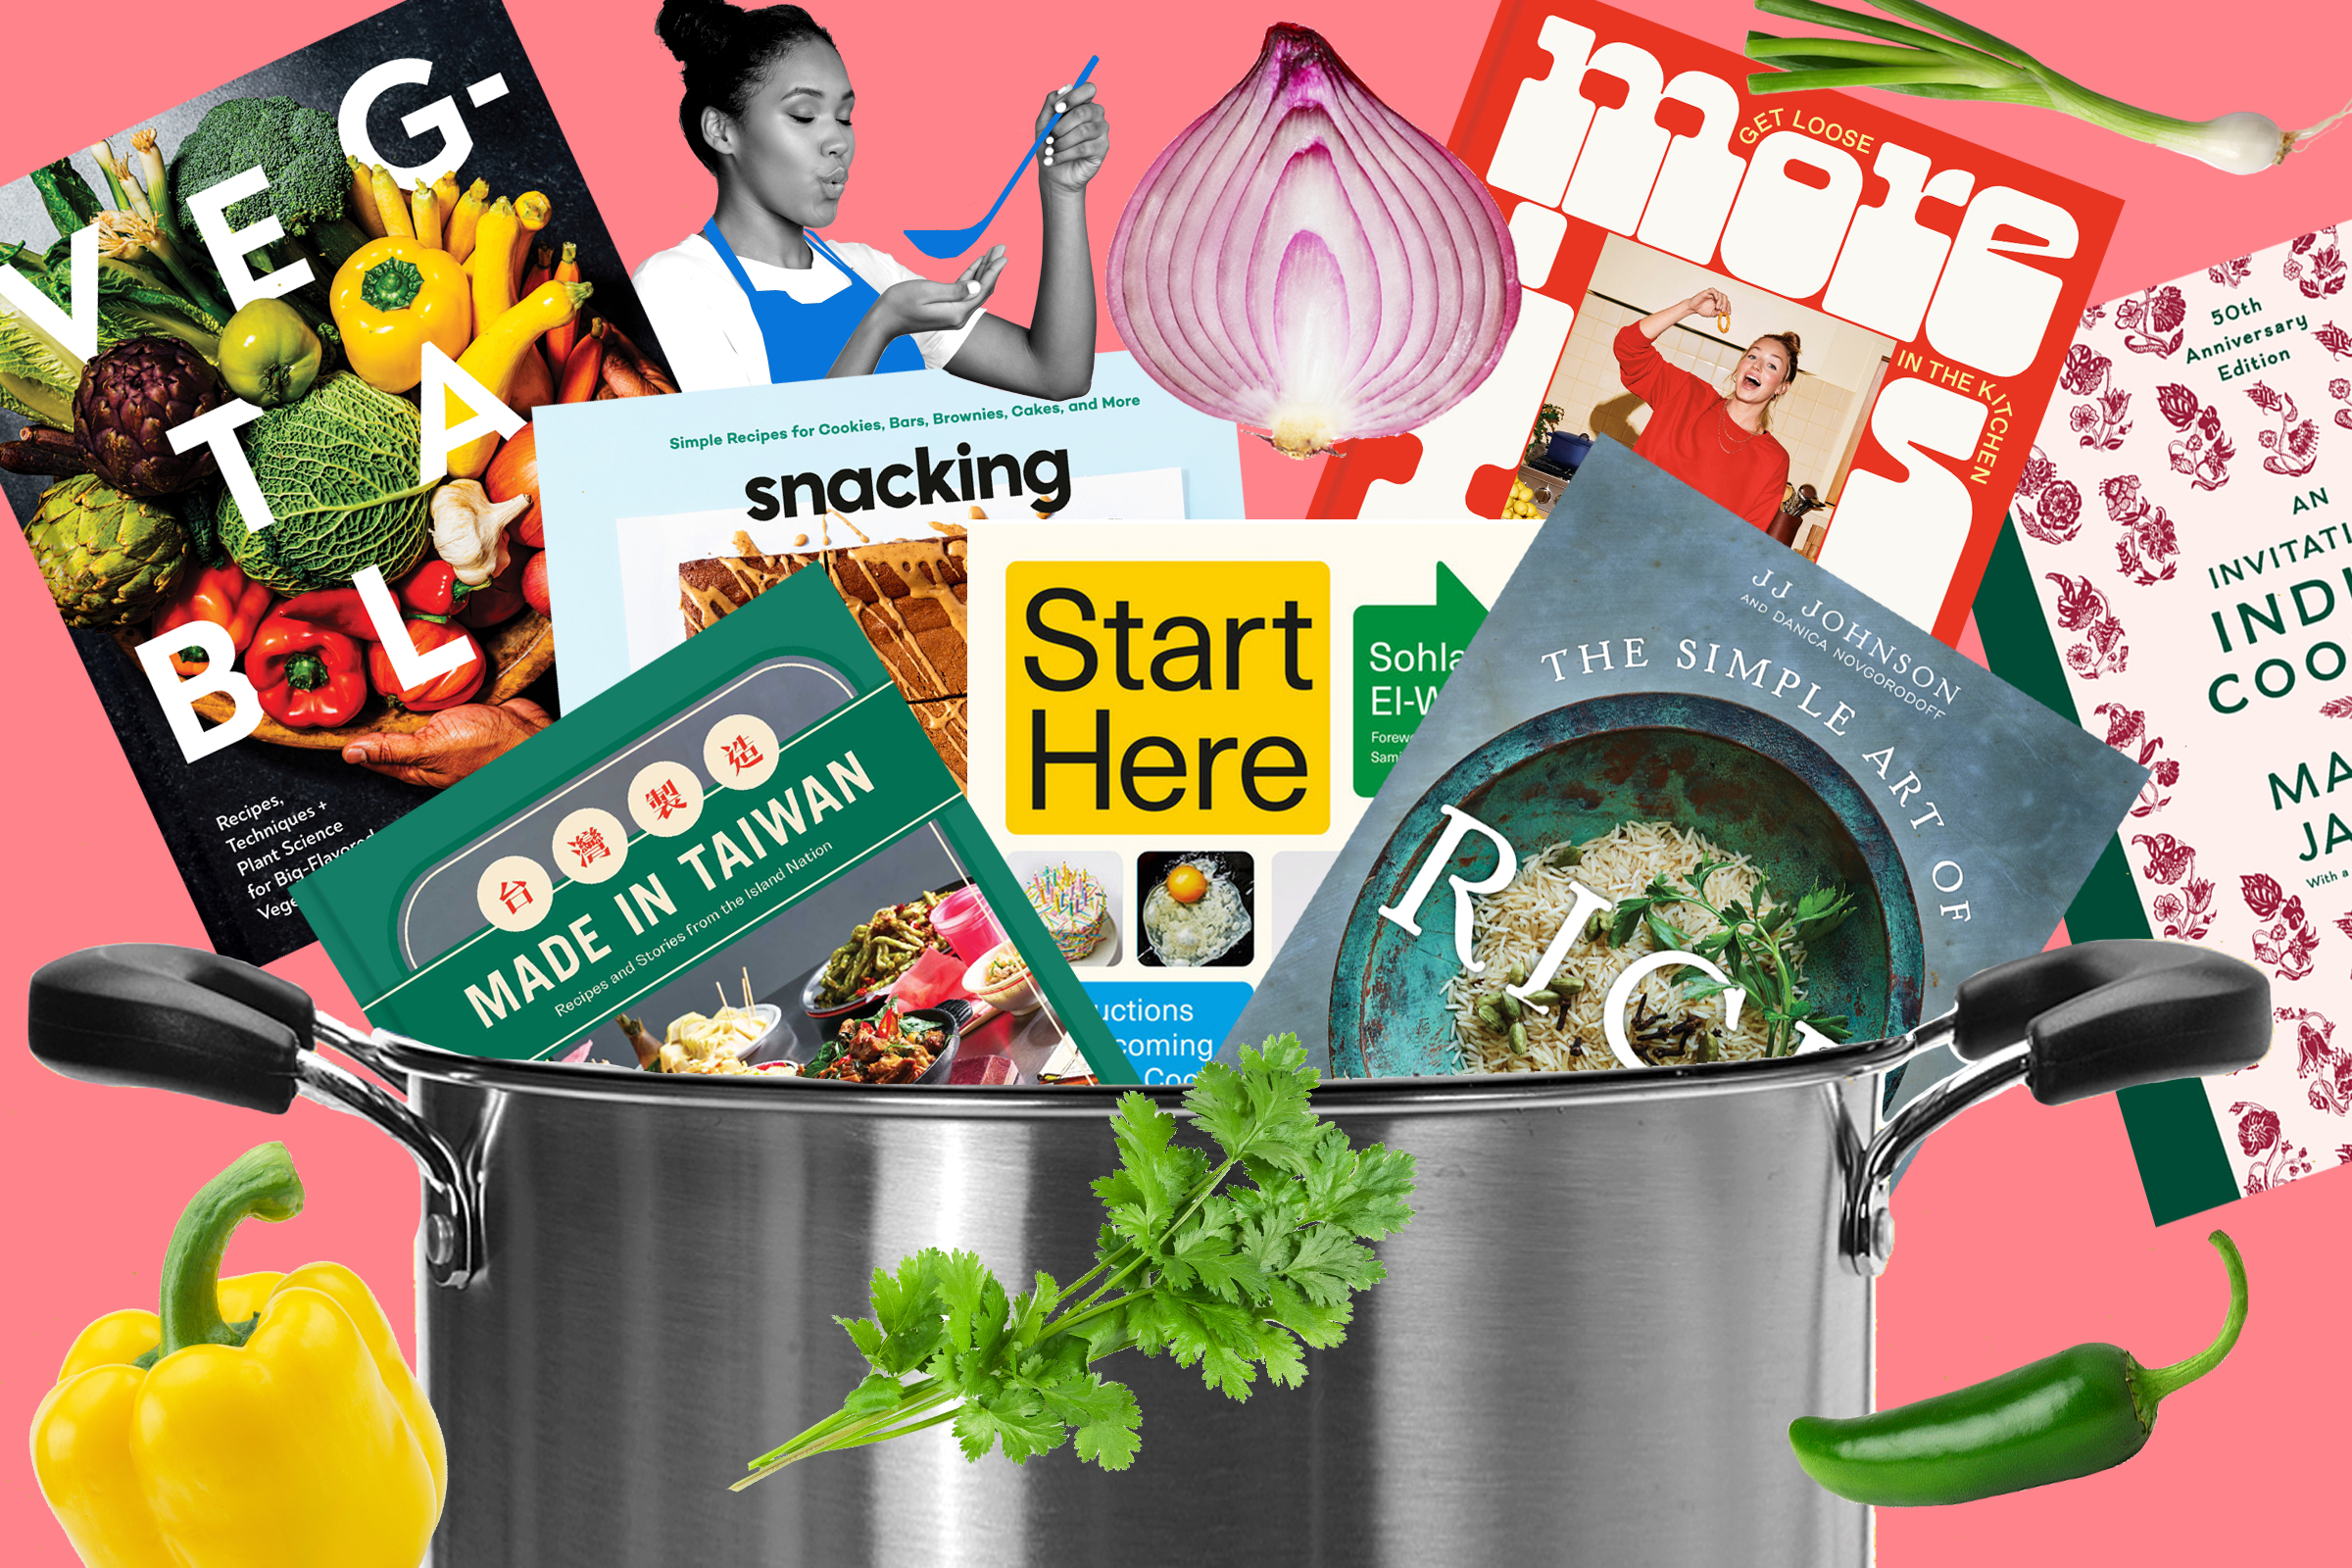 New cookbooks come out of a big stock pot, interspersed with herbs, peppers, and an onion. Collage illustration. 